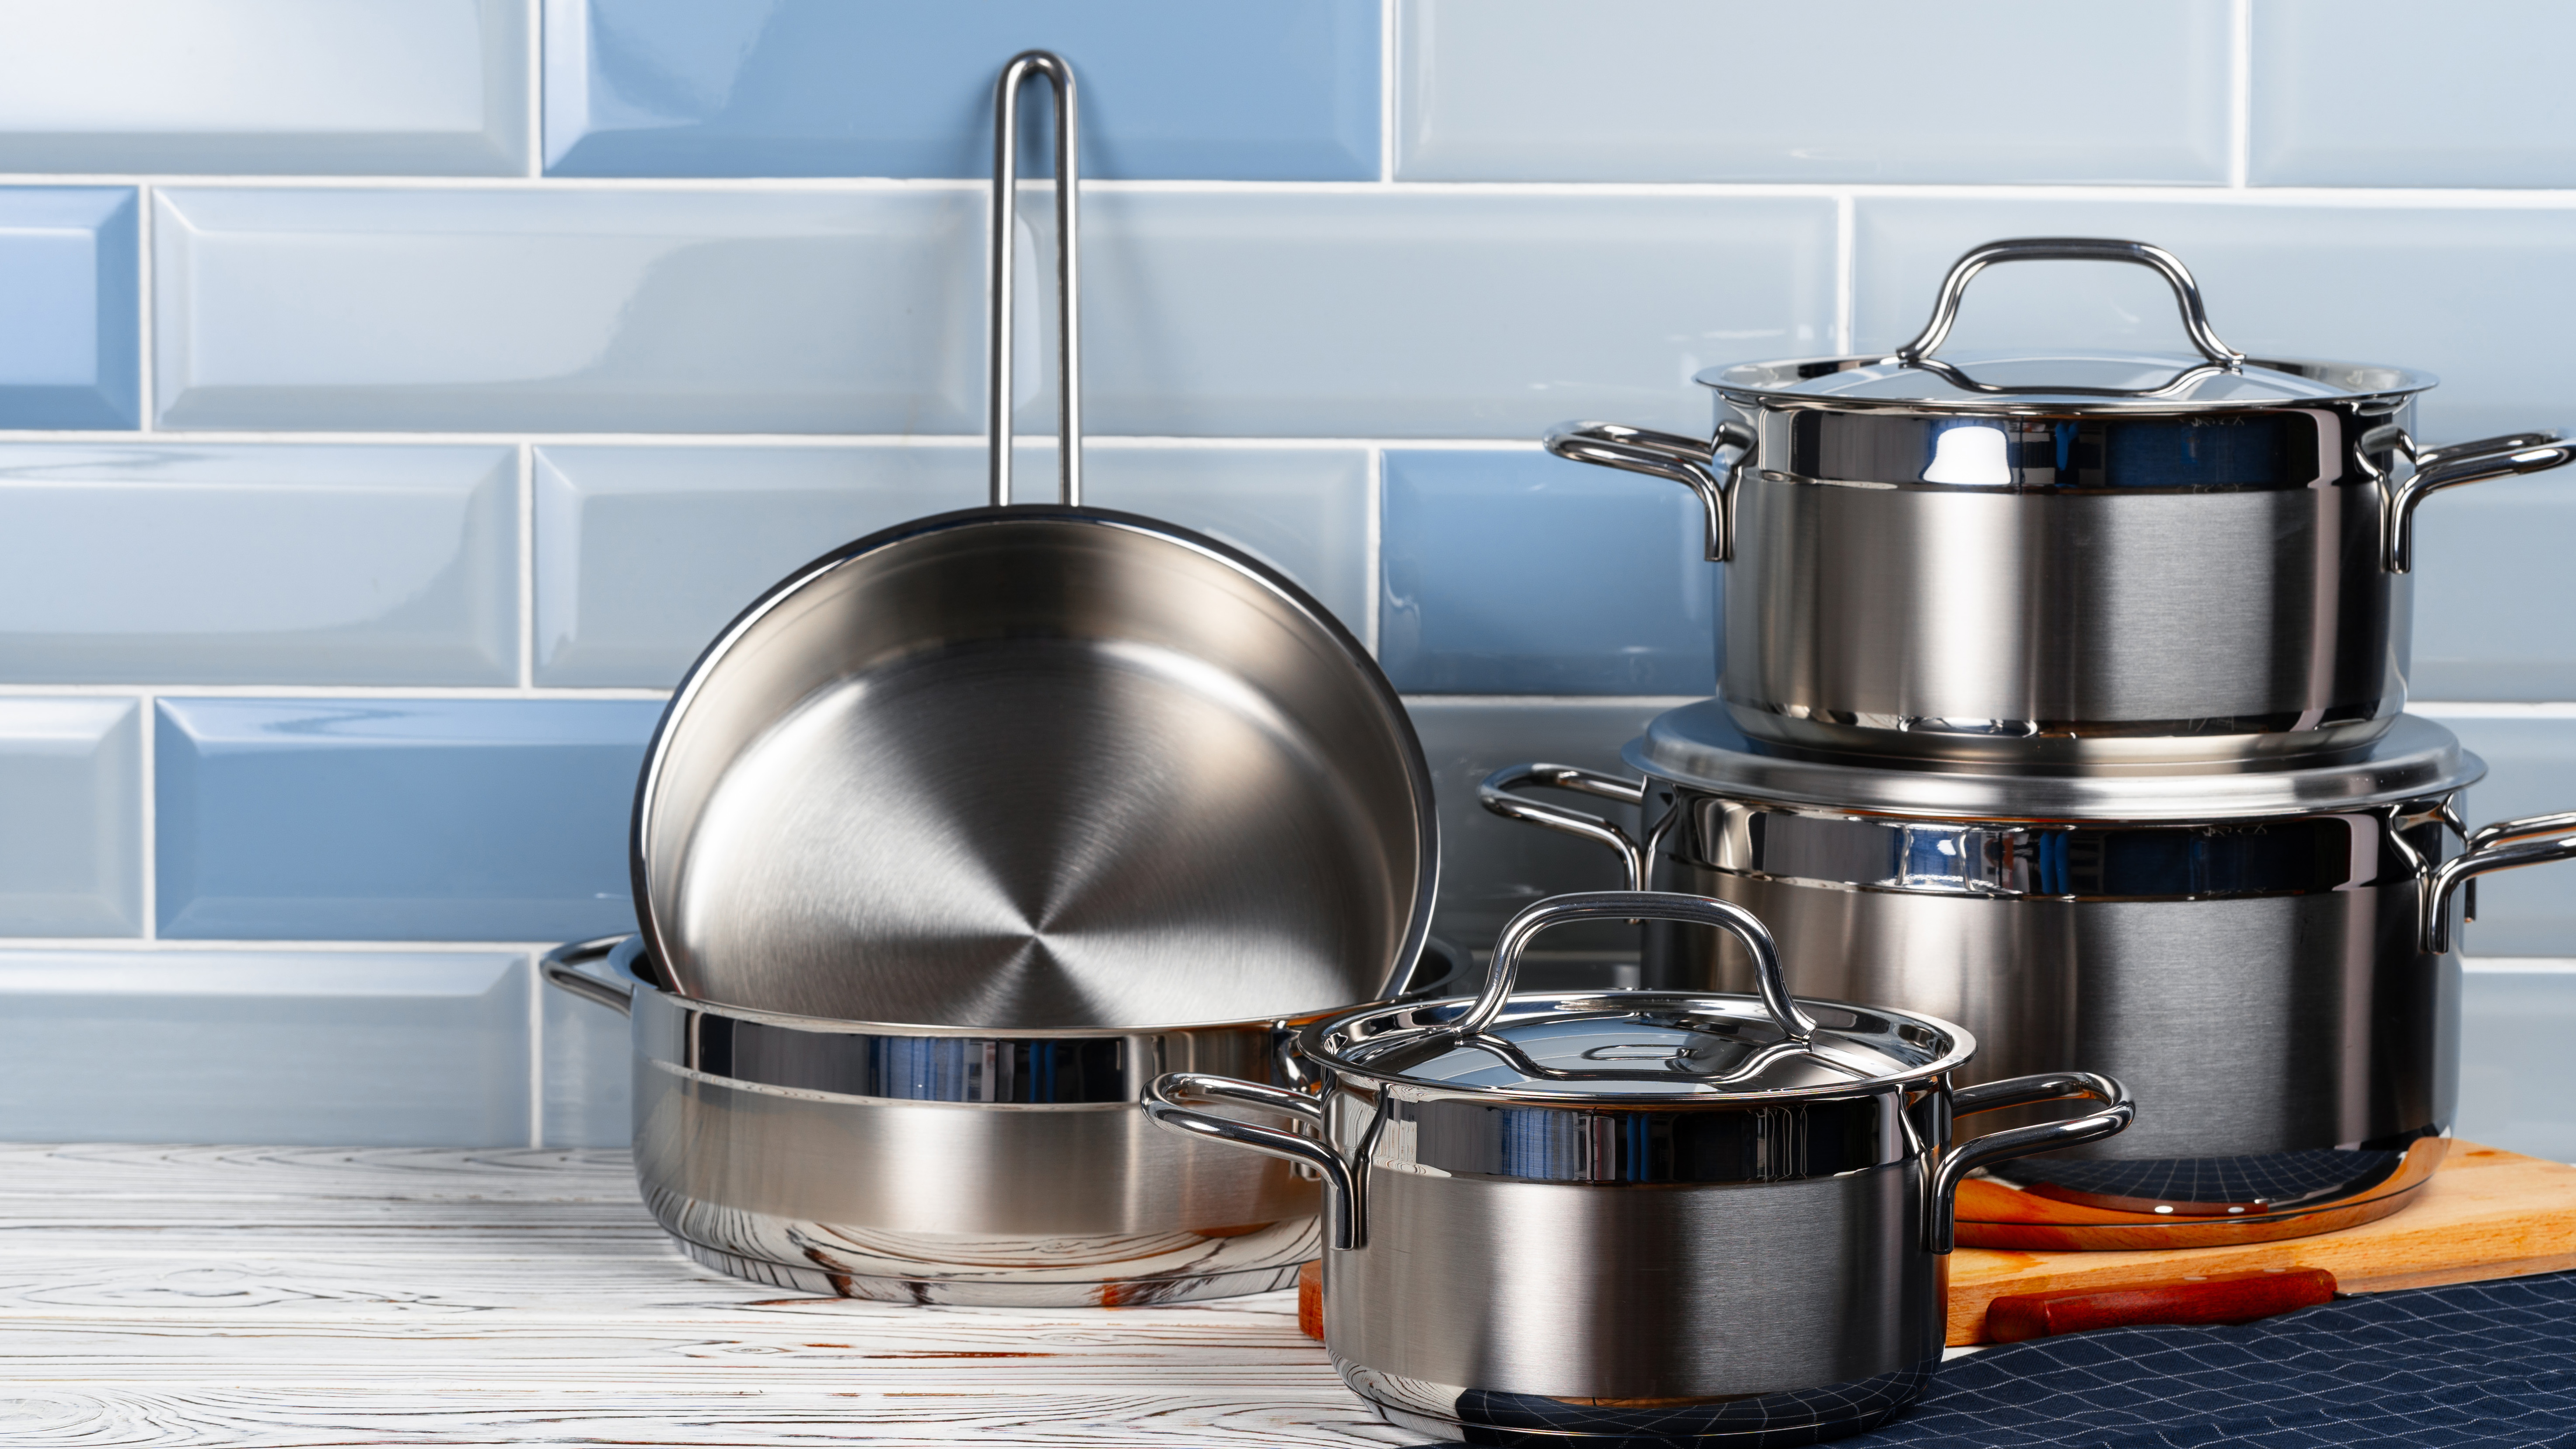 A stack of five clean stainless steel pans on a kitchen countertop in front of blue tiles